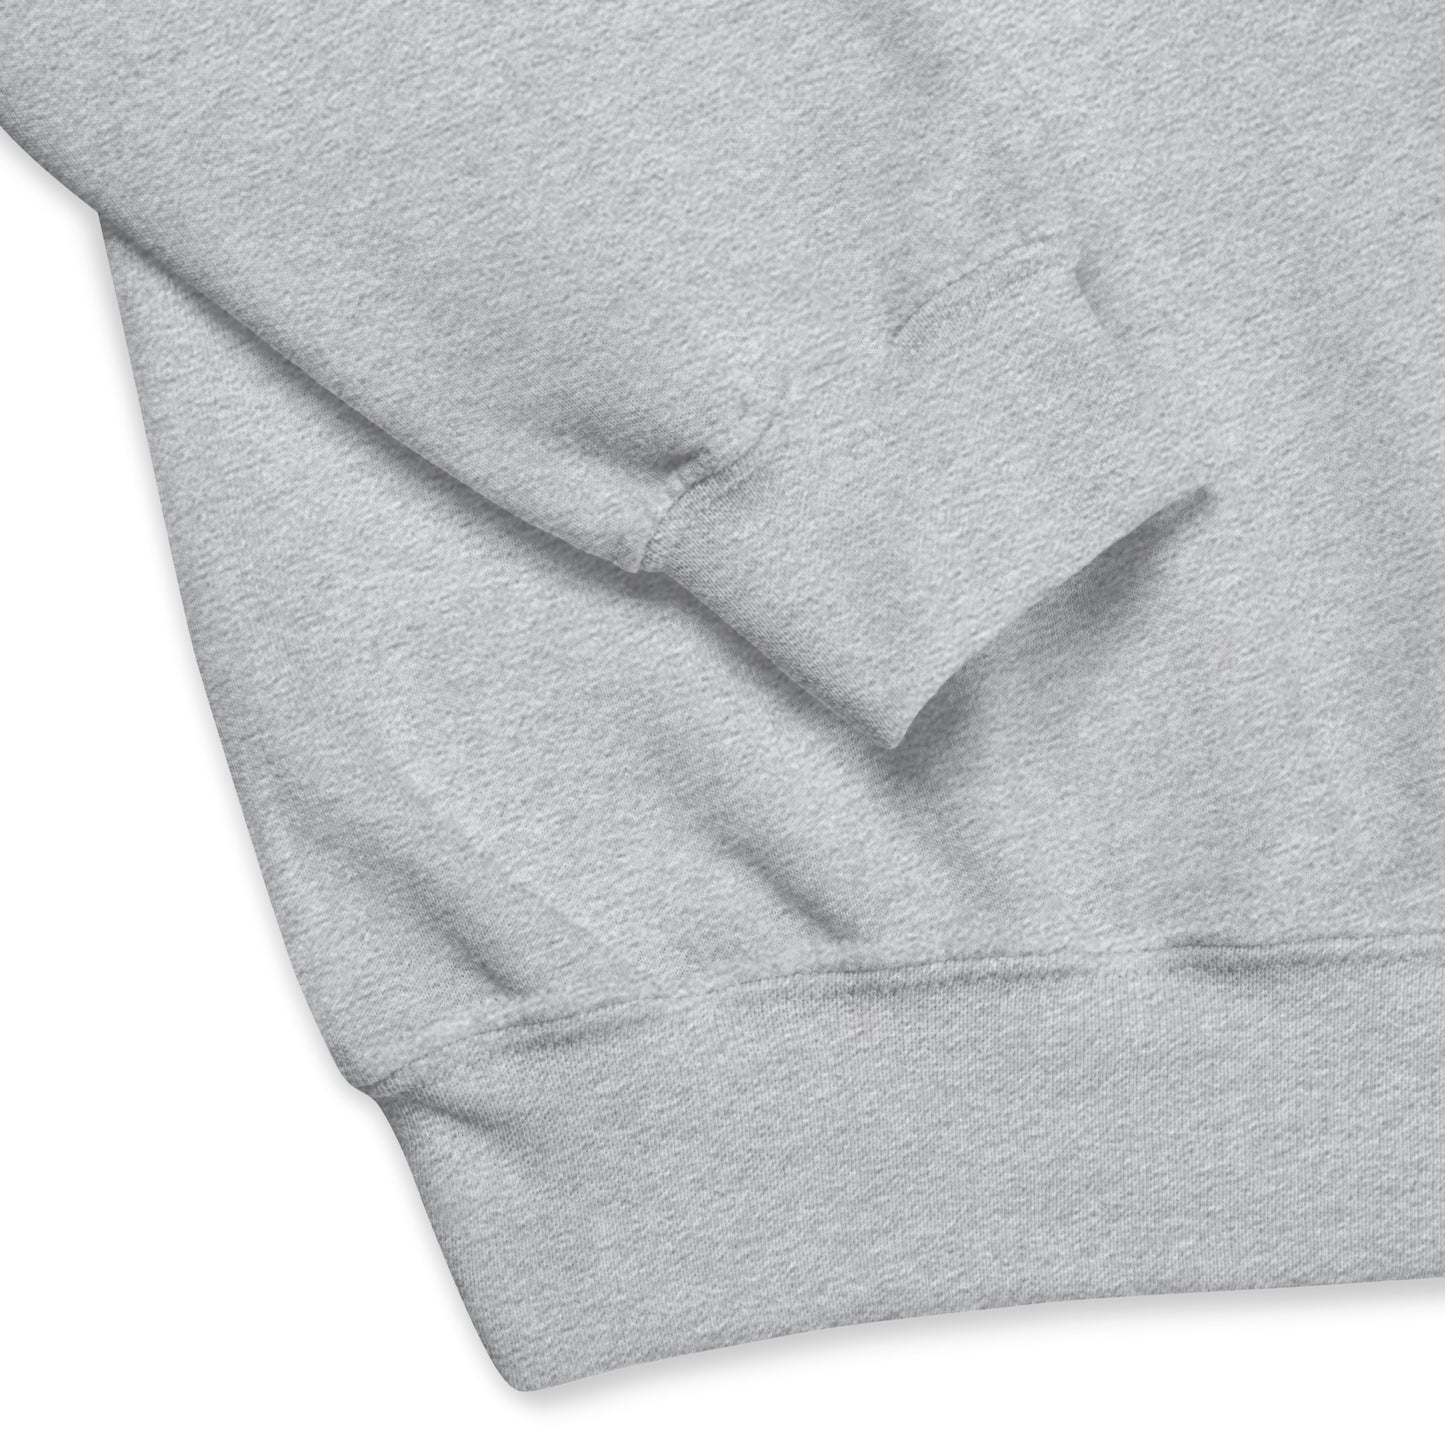 A54 Embroidered Crewneck in Grey